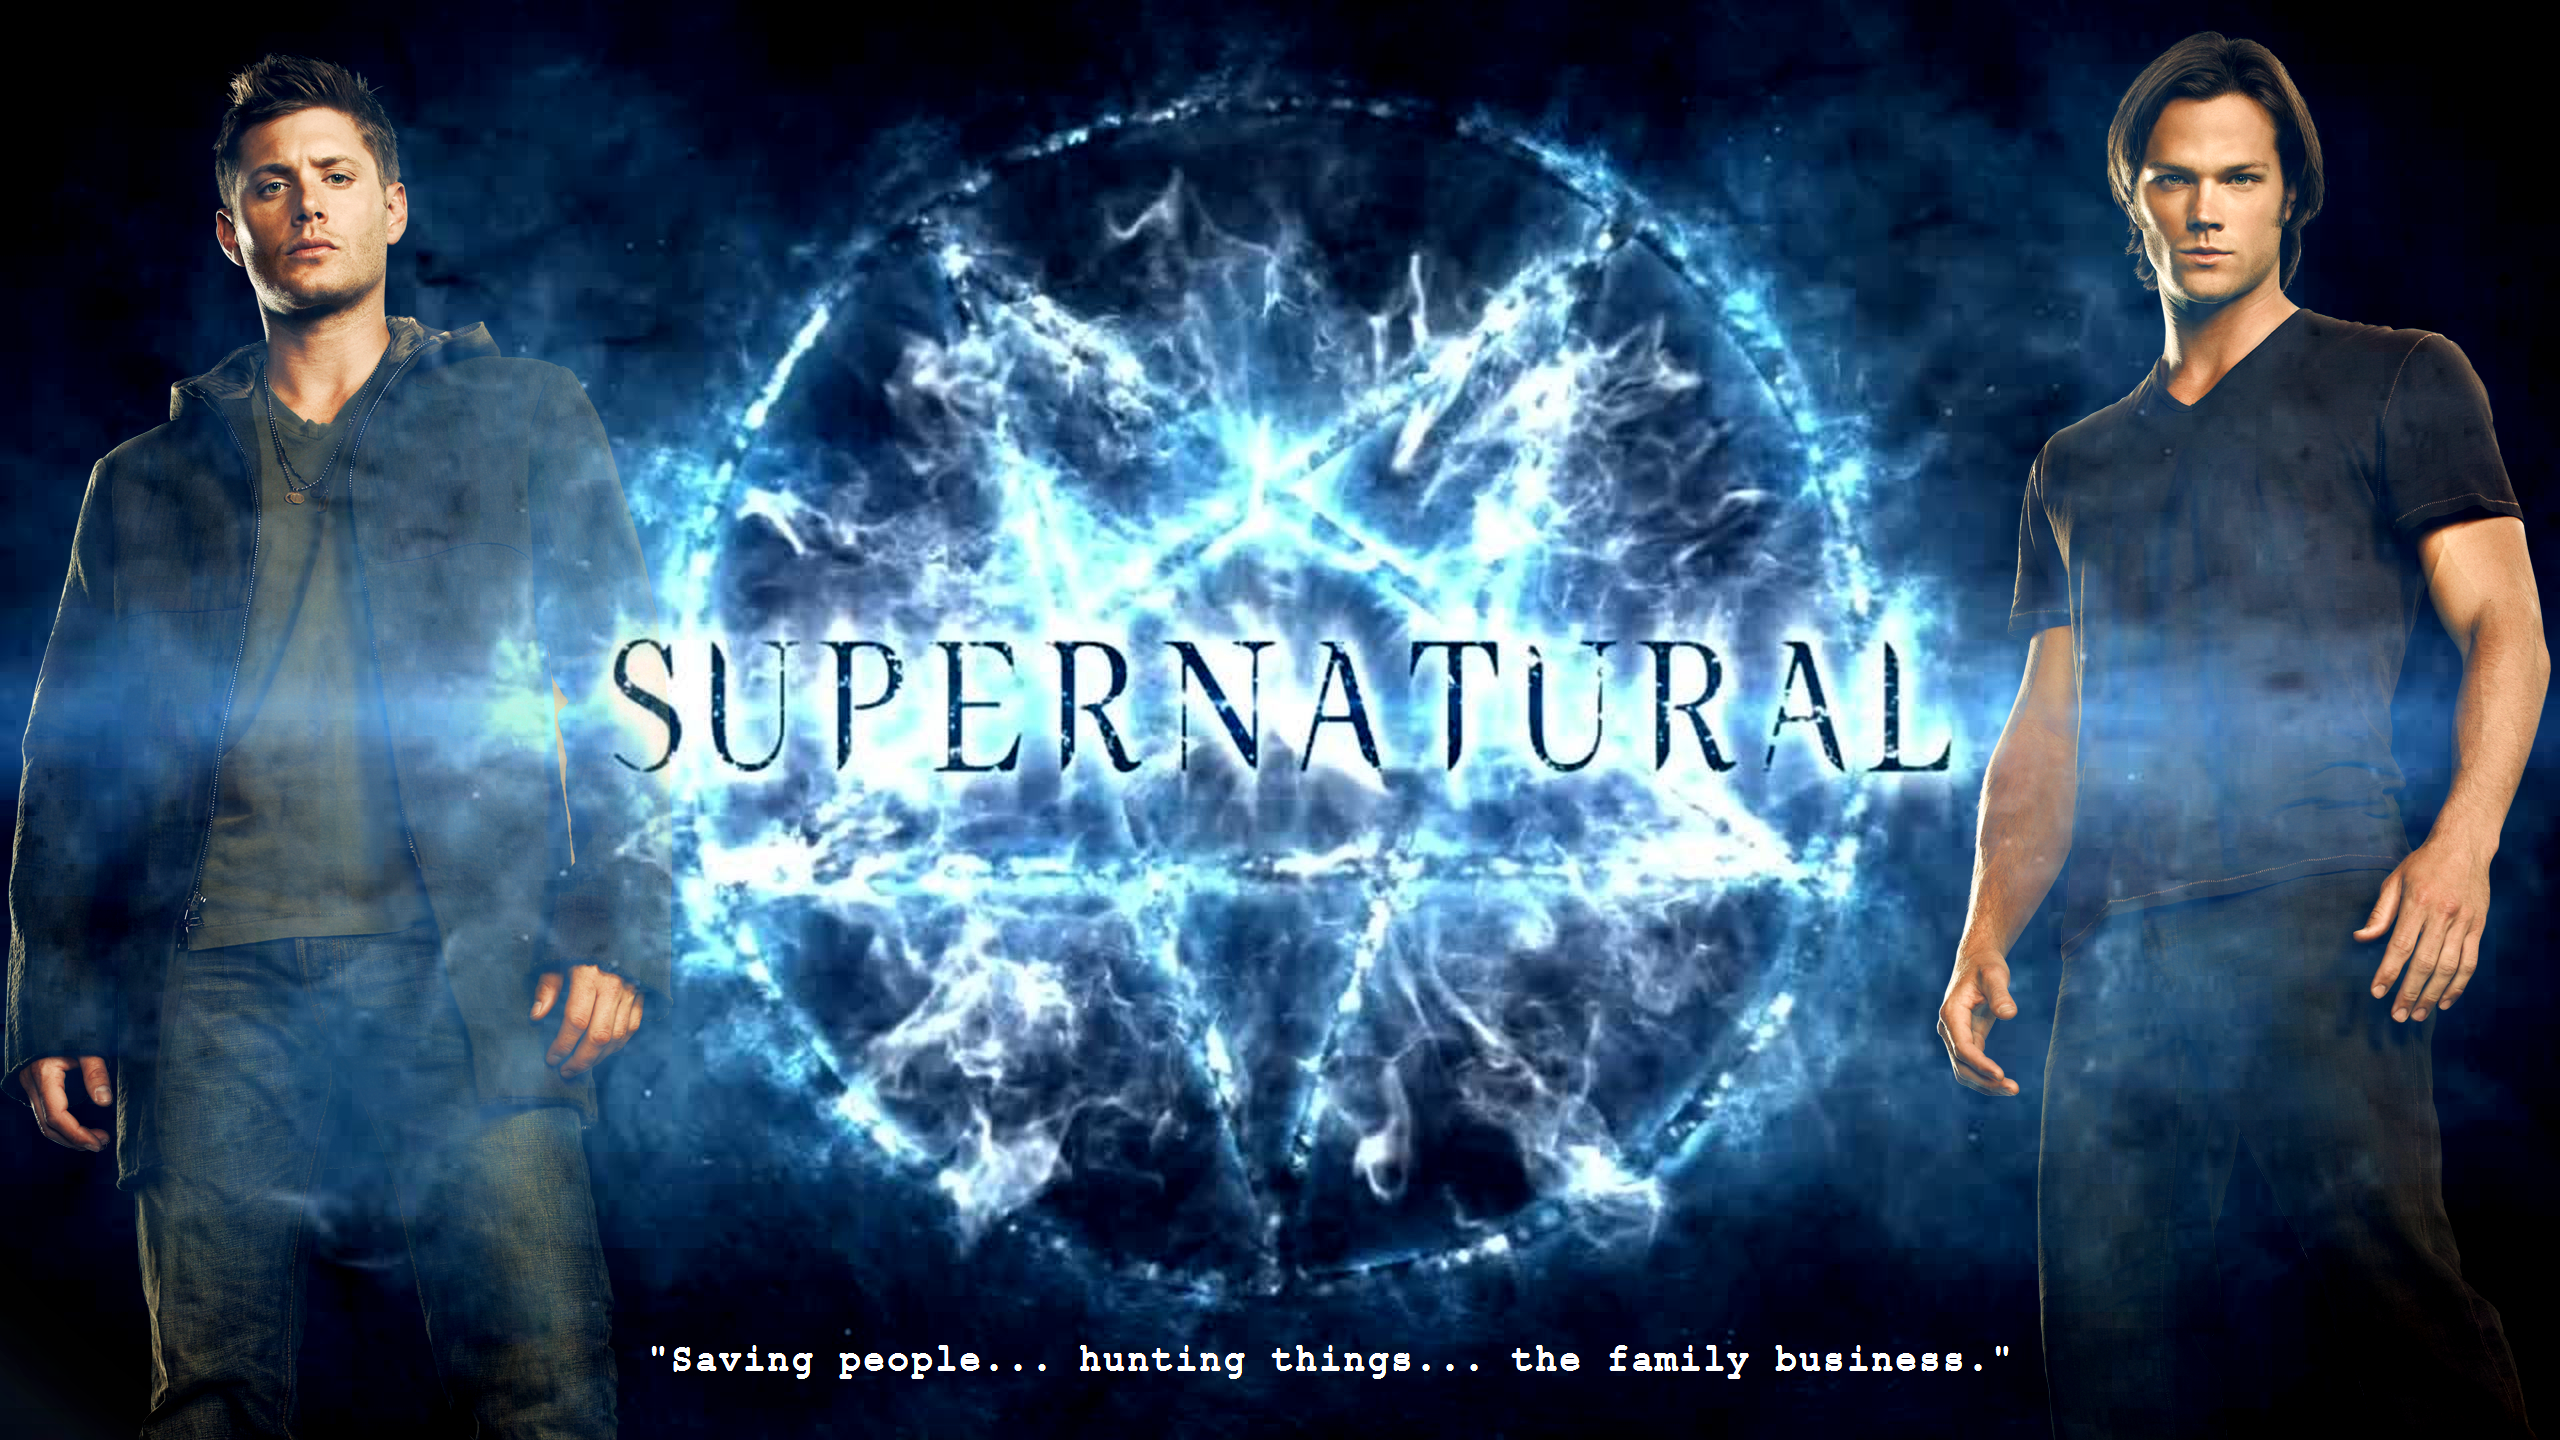 Fan Art Supernatural Wallpaper - I couldn't find the wallpaper of my dreams, so I tried my best to make it myself